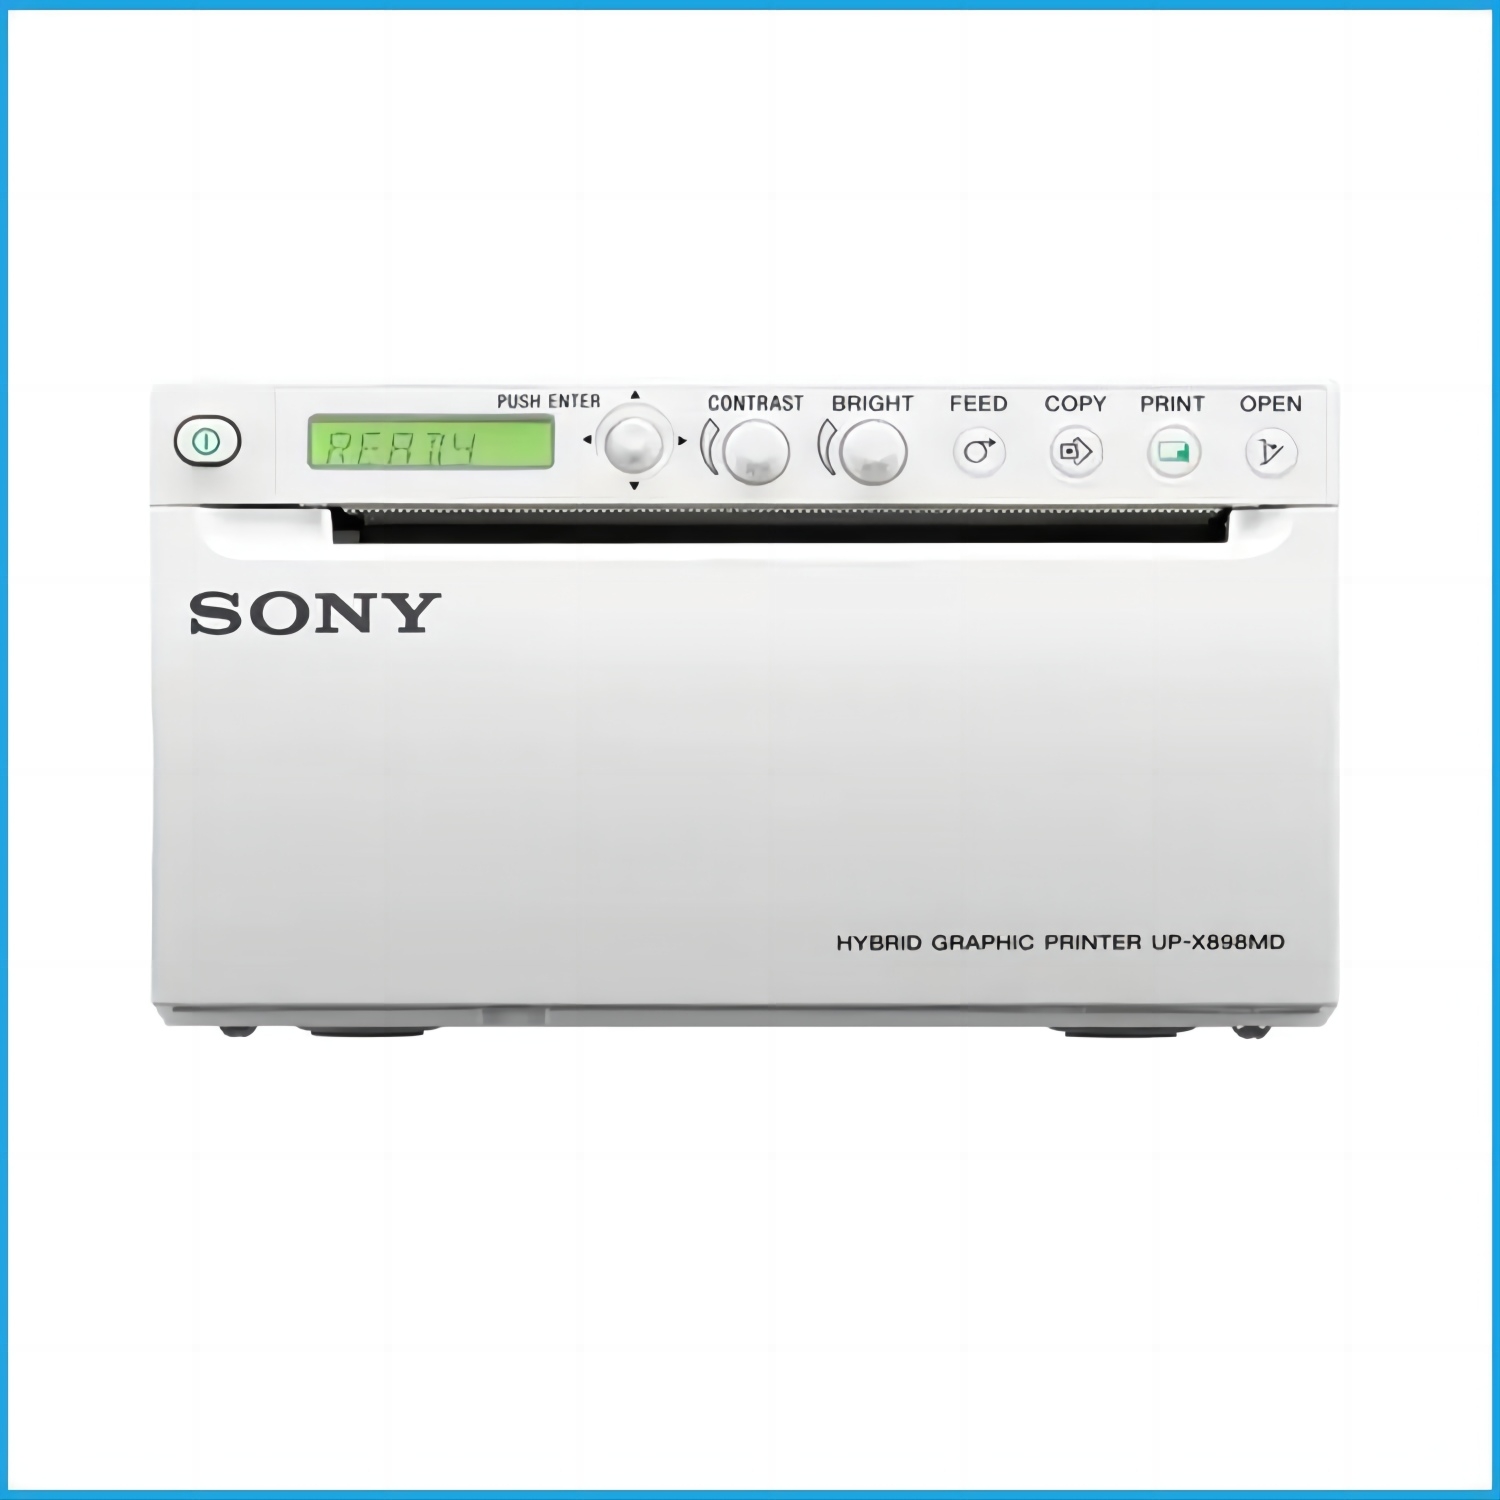 SONY UP-898MD Ultrasound inkjet printers black and white video graphic printer digital printers for Sonoscape GE and Mindray ect Featured Image